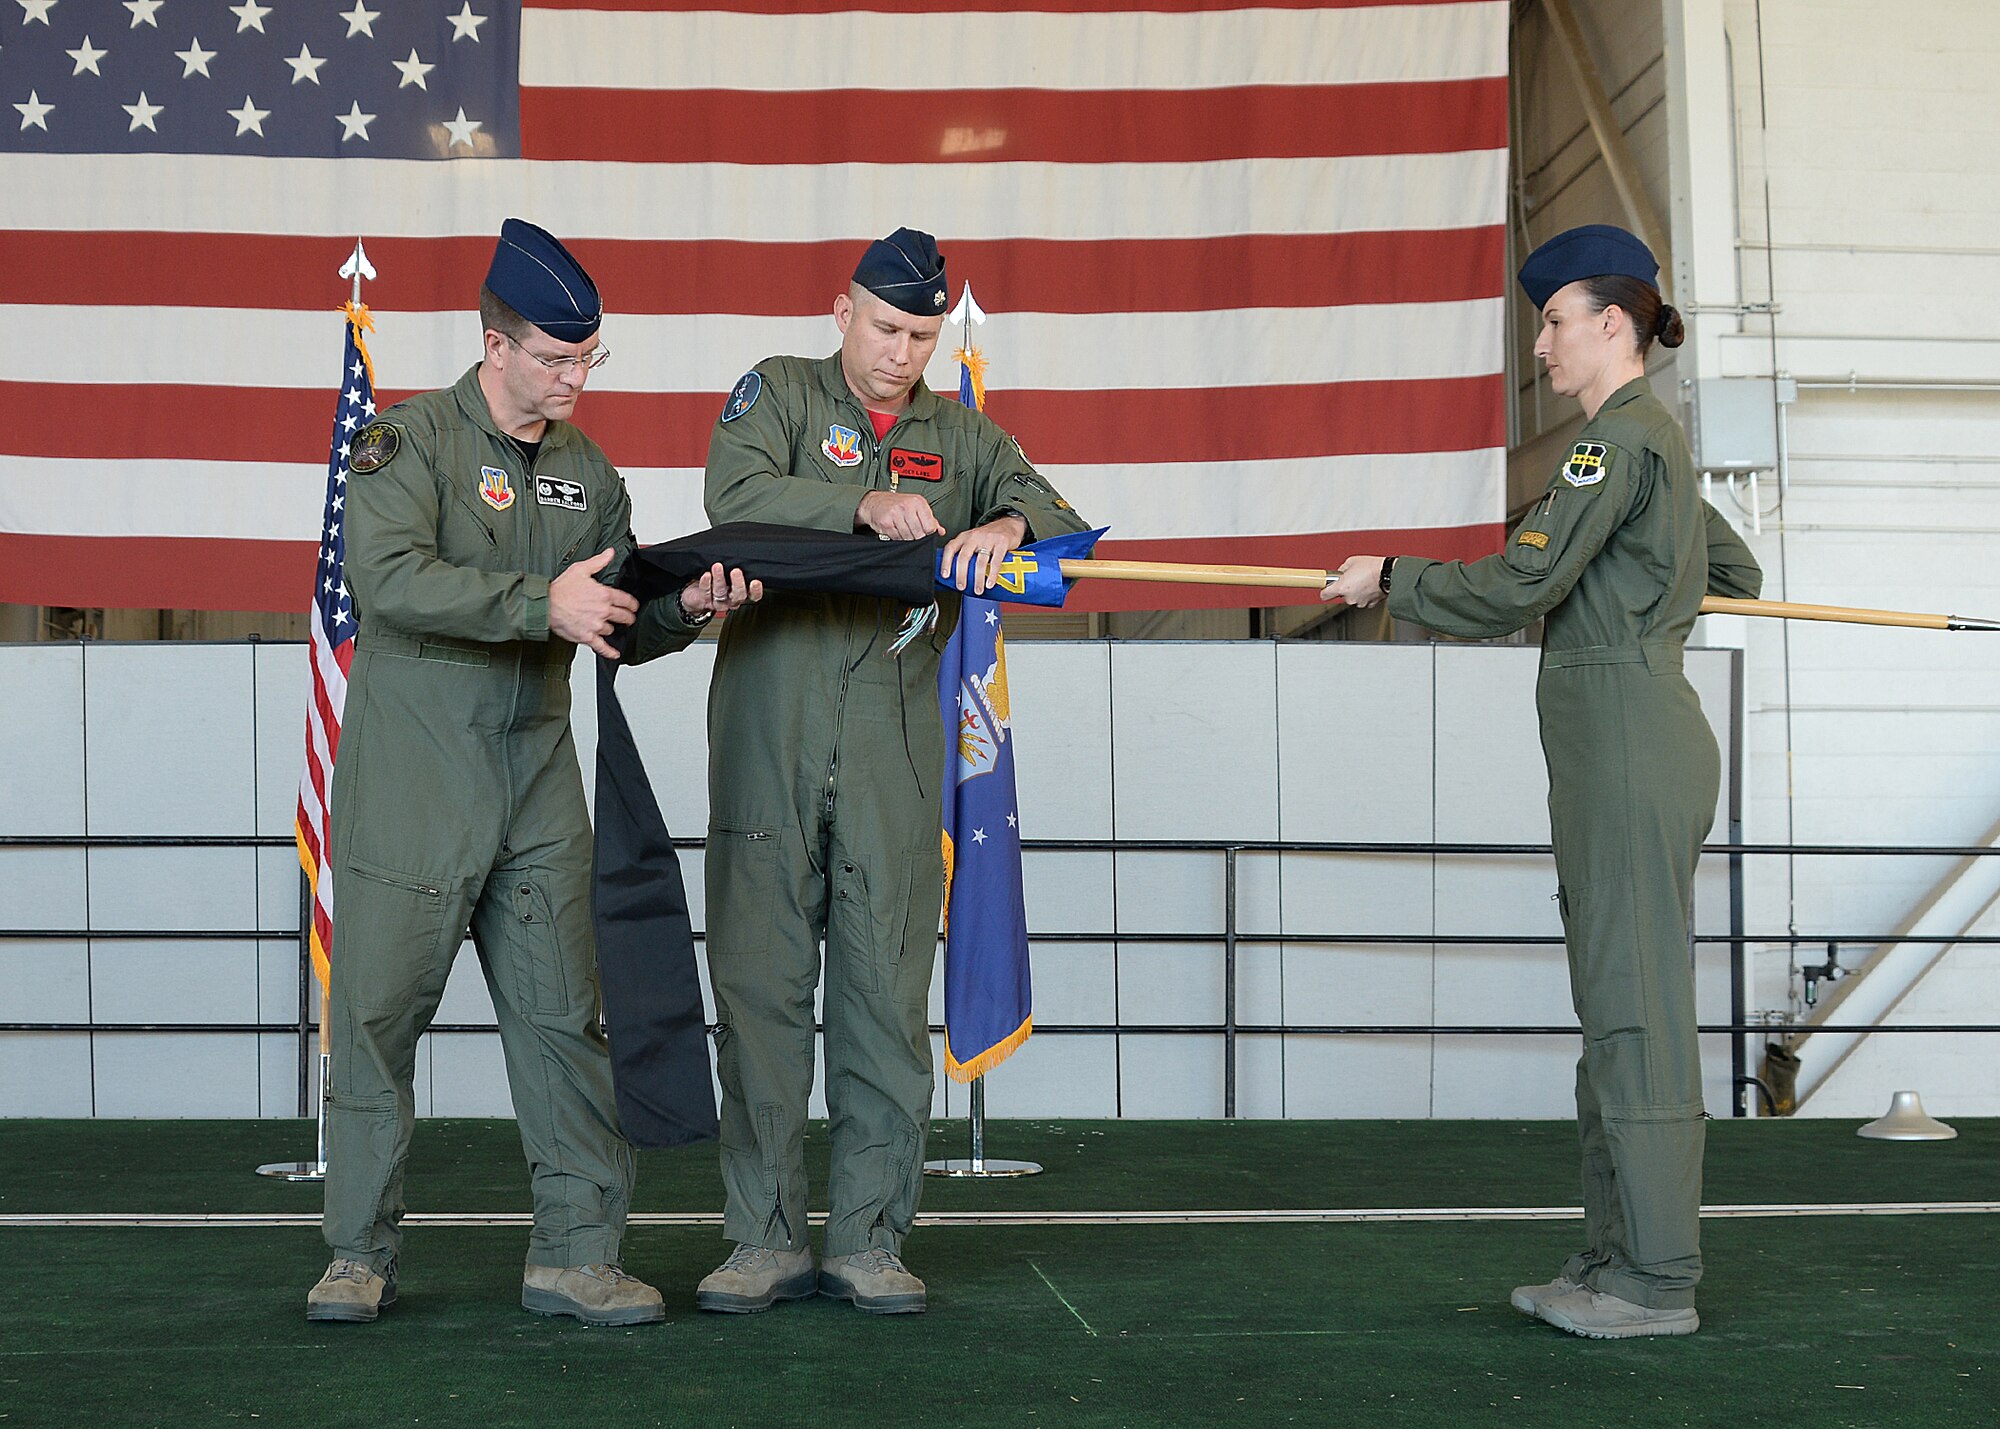 Col. Darren B. Halford, 9th Operations Group commander and Lt. Col. Joseph Laws, 427th Reconnaissance Squadron commander, case the unit flag during an inactivation ceremony Nov. 20, 2015, at Beale Air Force Base, California.  MC-12W Liberty Airmen from the past and present attended the ceremony and reception to reminisce about their time supporting the MC-12 mission. Since May 2012, the 427th RS has deployed and trained 455 Airmen, flown 4,770 combat missions, eliminated 503 enemy combatants, and saved countless coalition lives. (U.S. Air Force photo by Robert Scott)